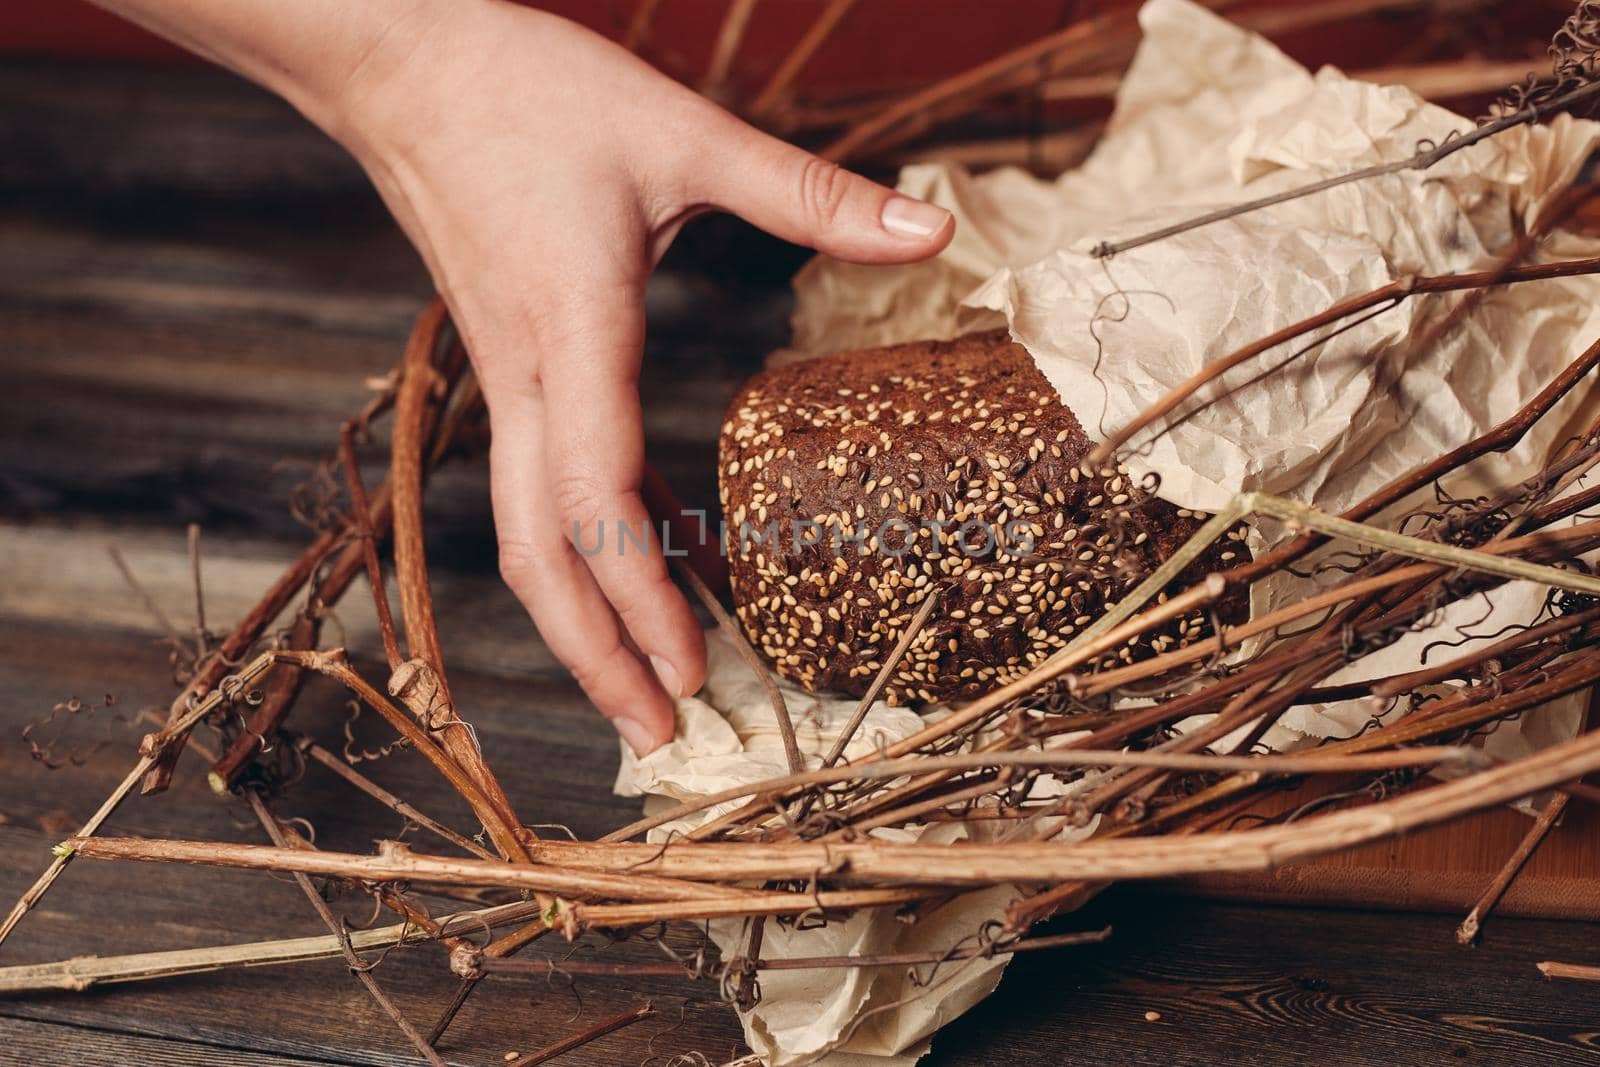 packed rye bread lies in a bird's nest on a red background by SHOTPRIME